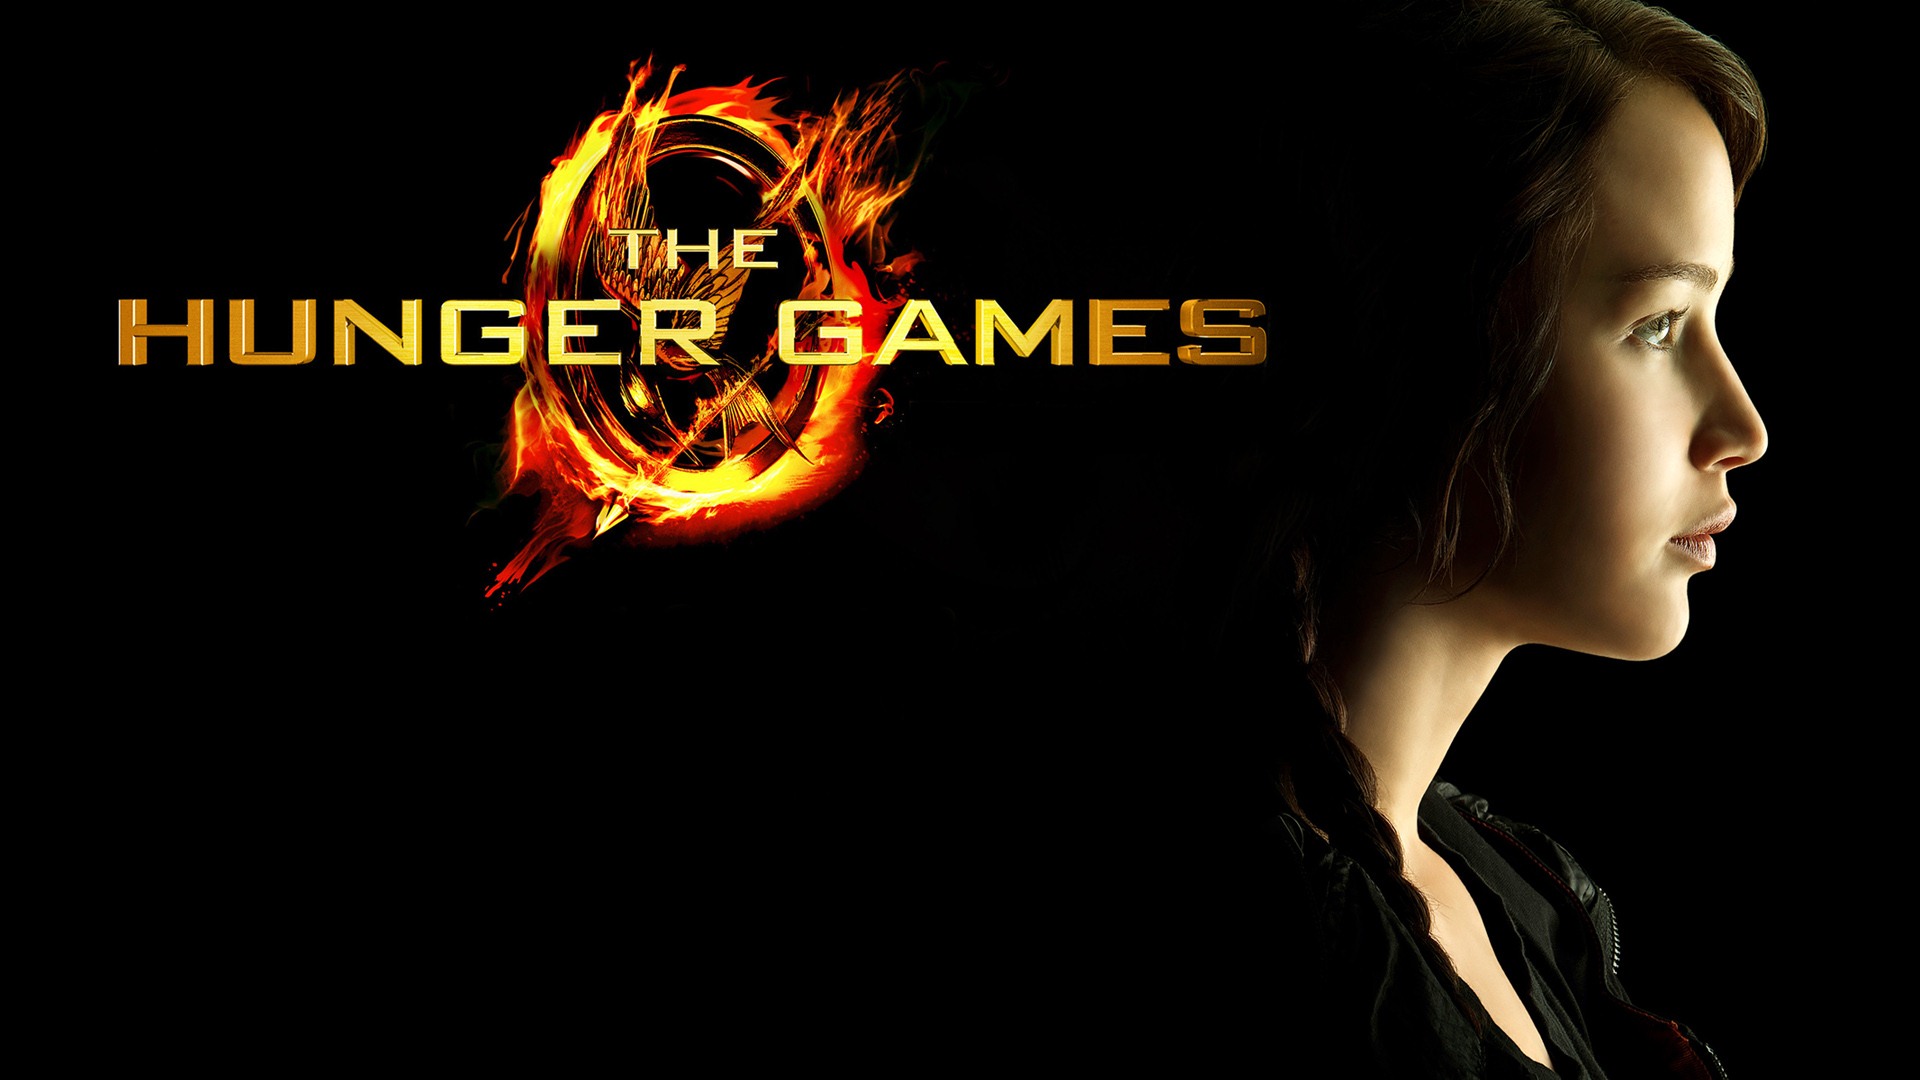 The Hunger Games HD wallpapers #7 - 1920x1080